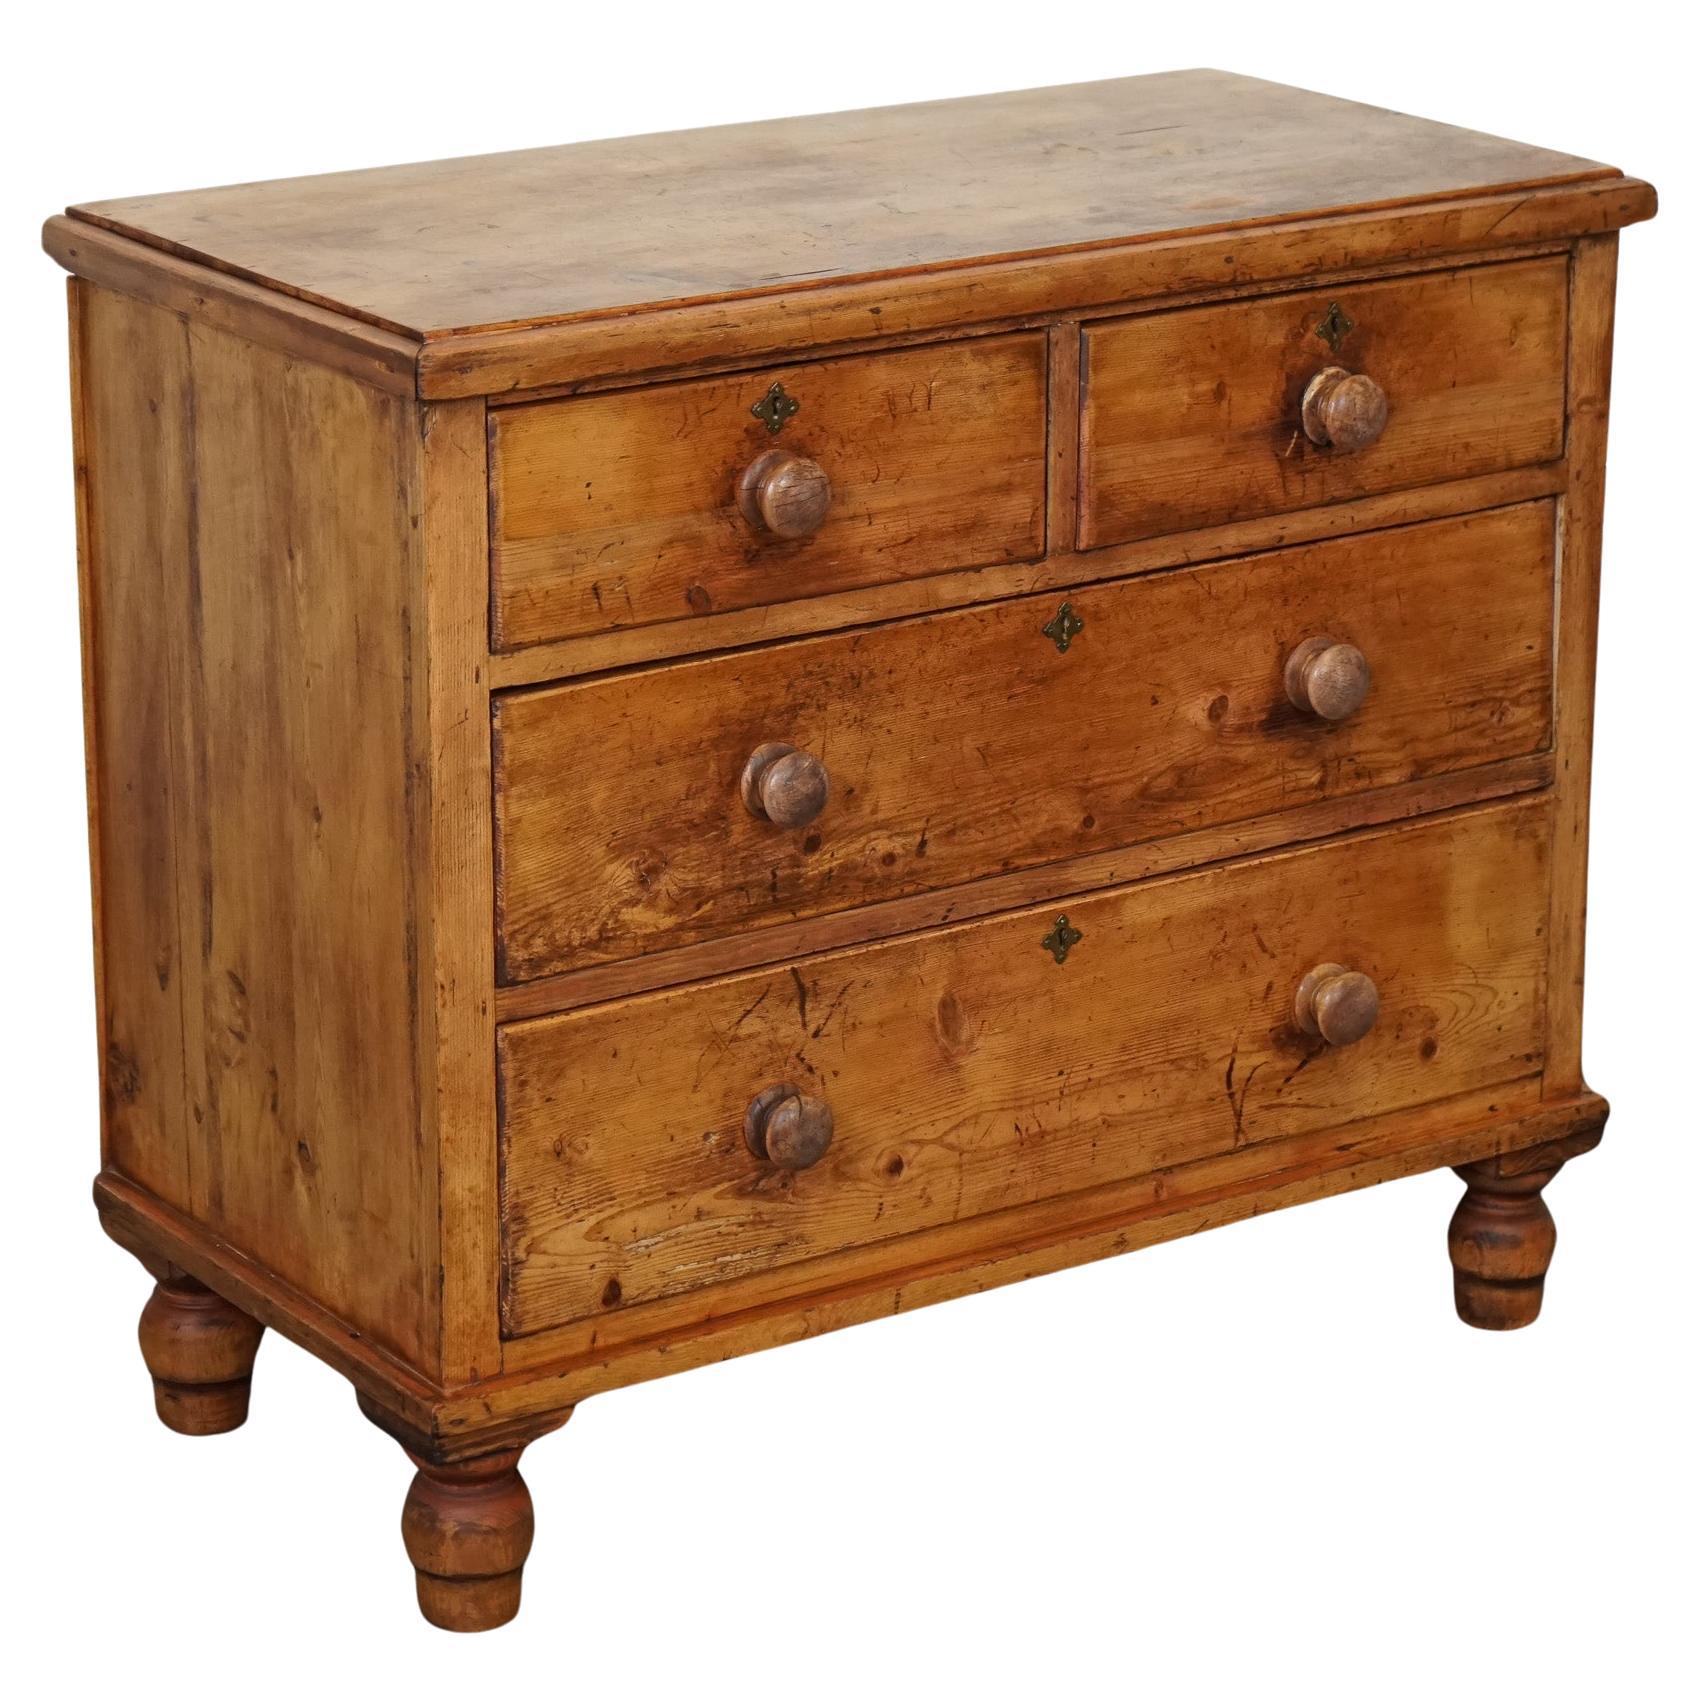 

We are delighted to offer for sale this Antique Late Victorian Pine Chest of Drawers With Original Turned Wooden Handles.

The Antique Late Victorian Pine Chest of Drawers with Original Turned Wooden Handles is a stunning piece that captures the